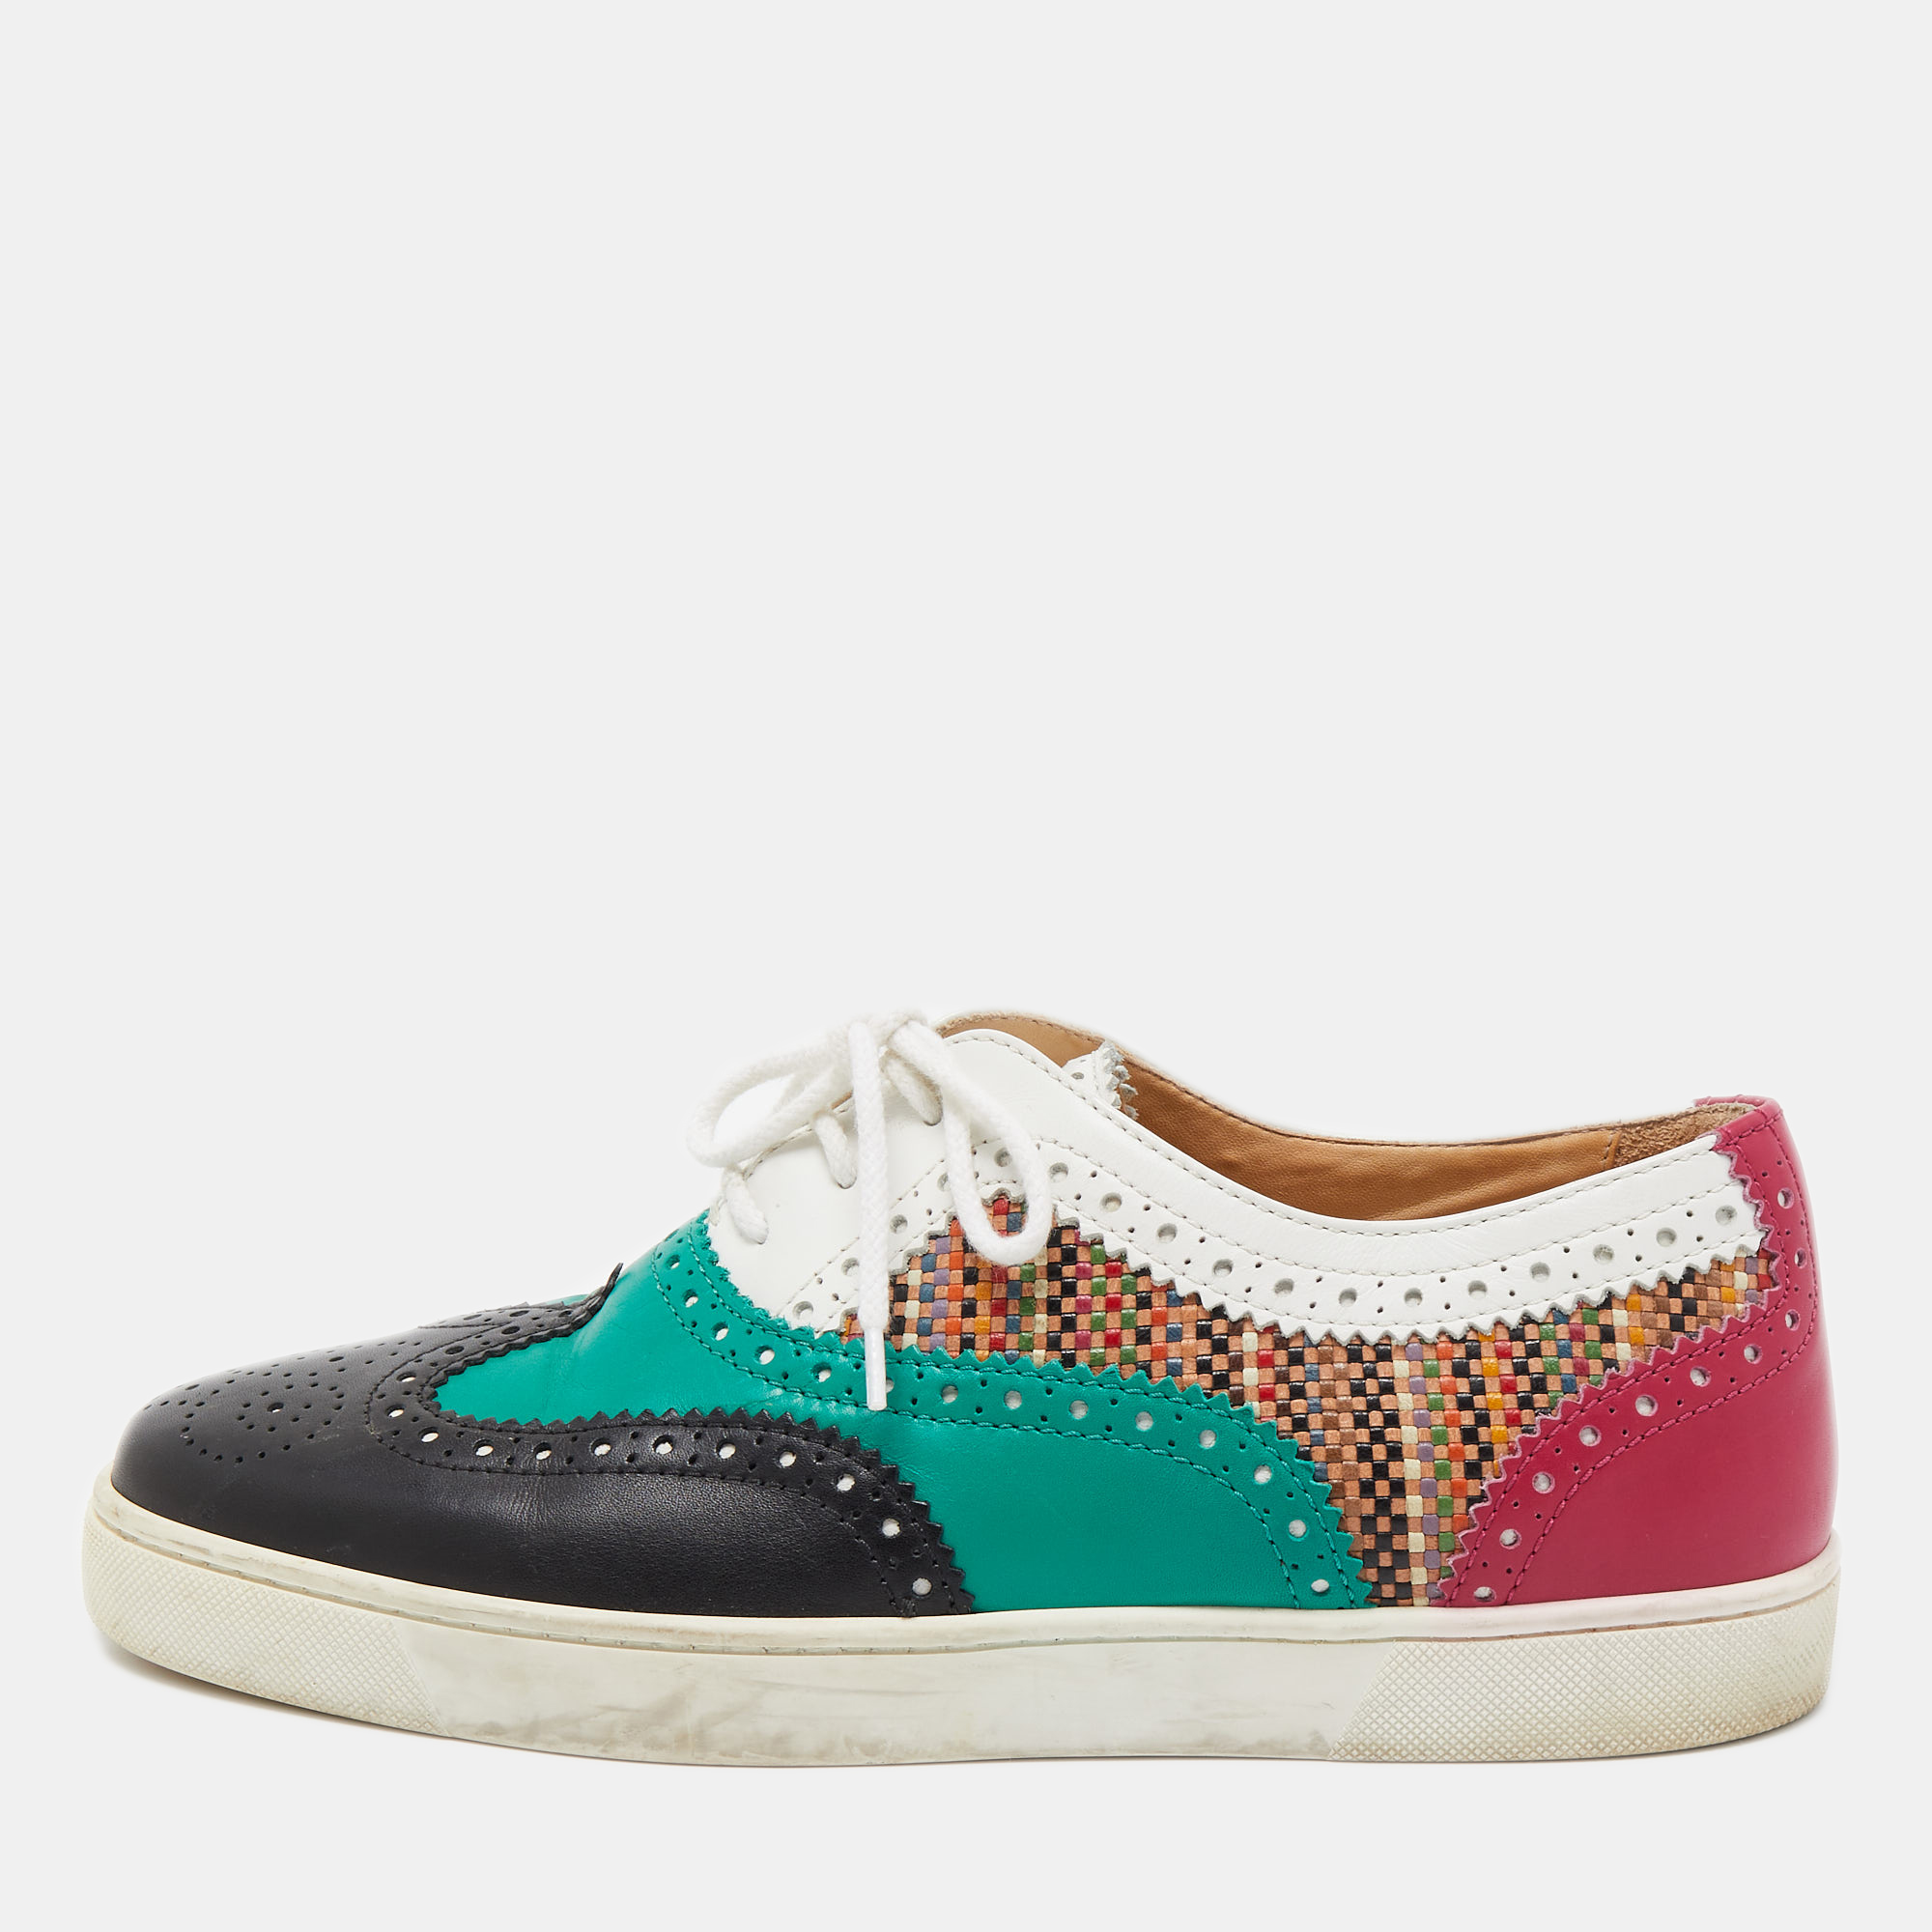 Pre-owned Christian Louboutin Multicolor Leather Oxford Trainers Size 43